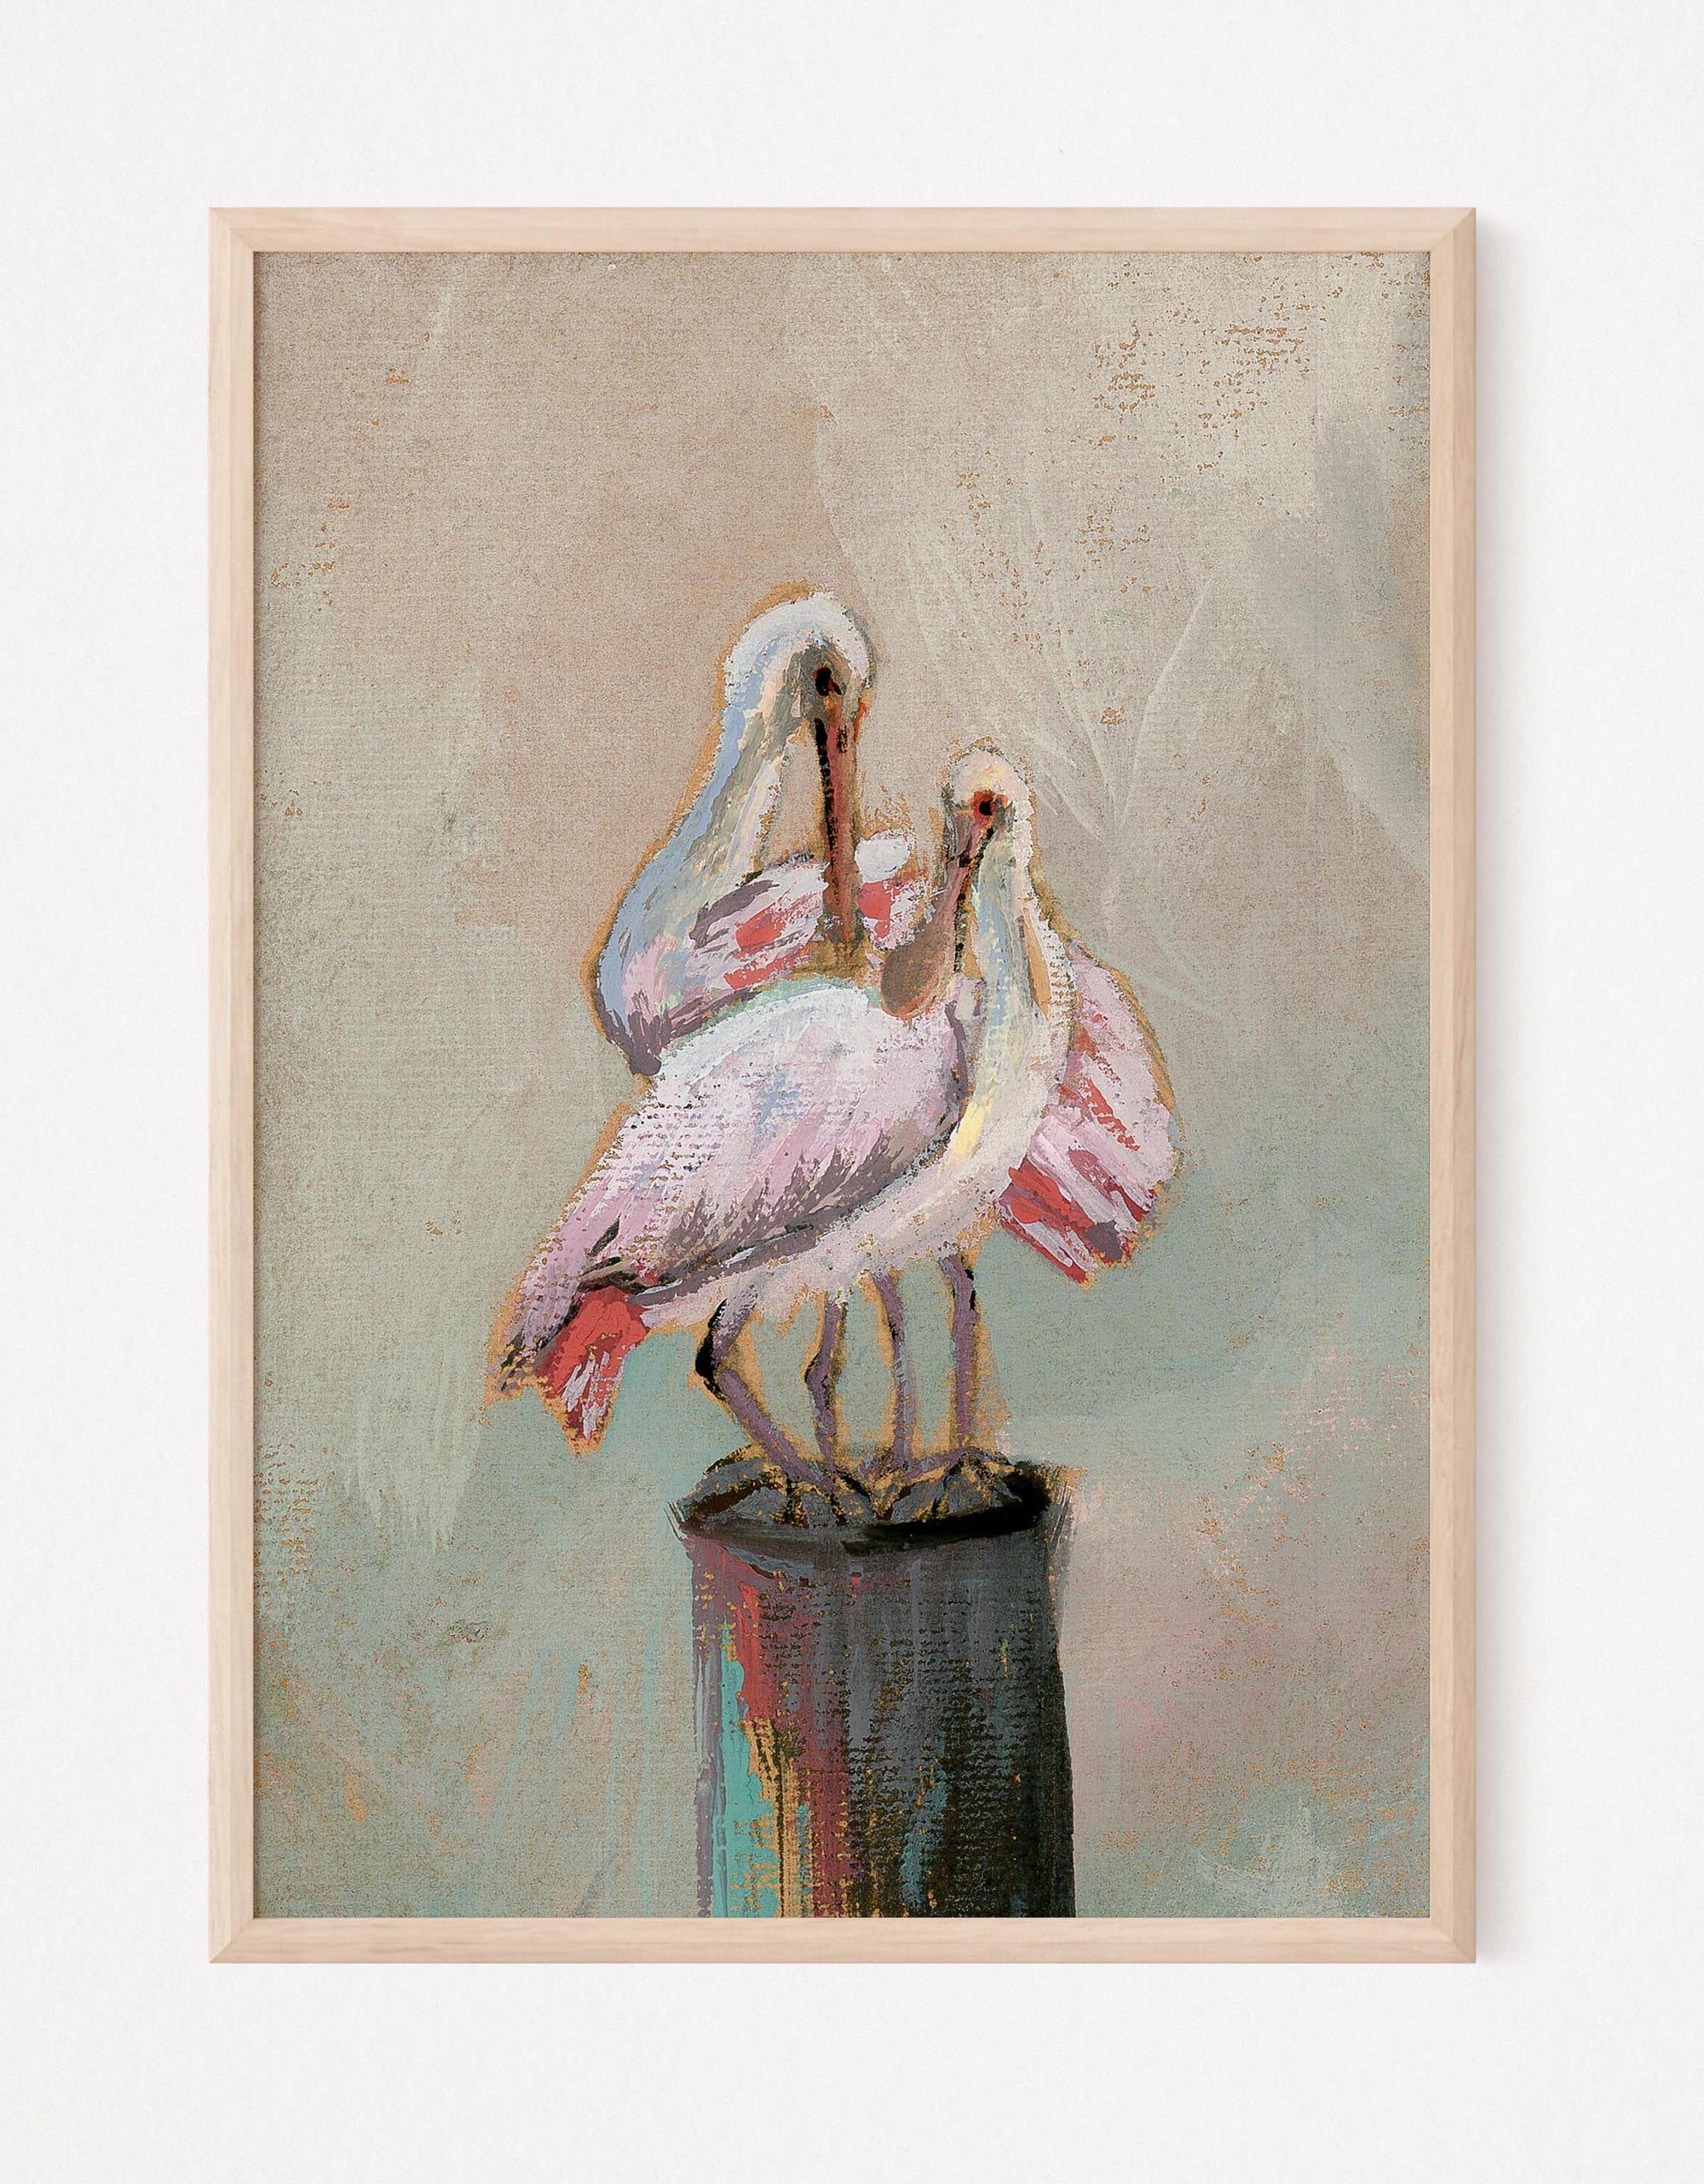 Sam And Cathy, a Roseate Spoonbill Vertical Print